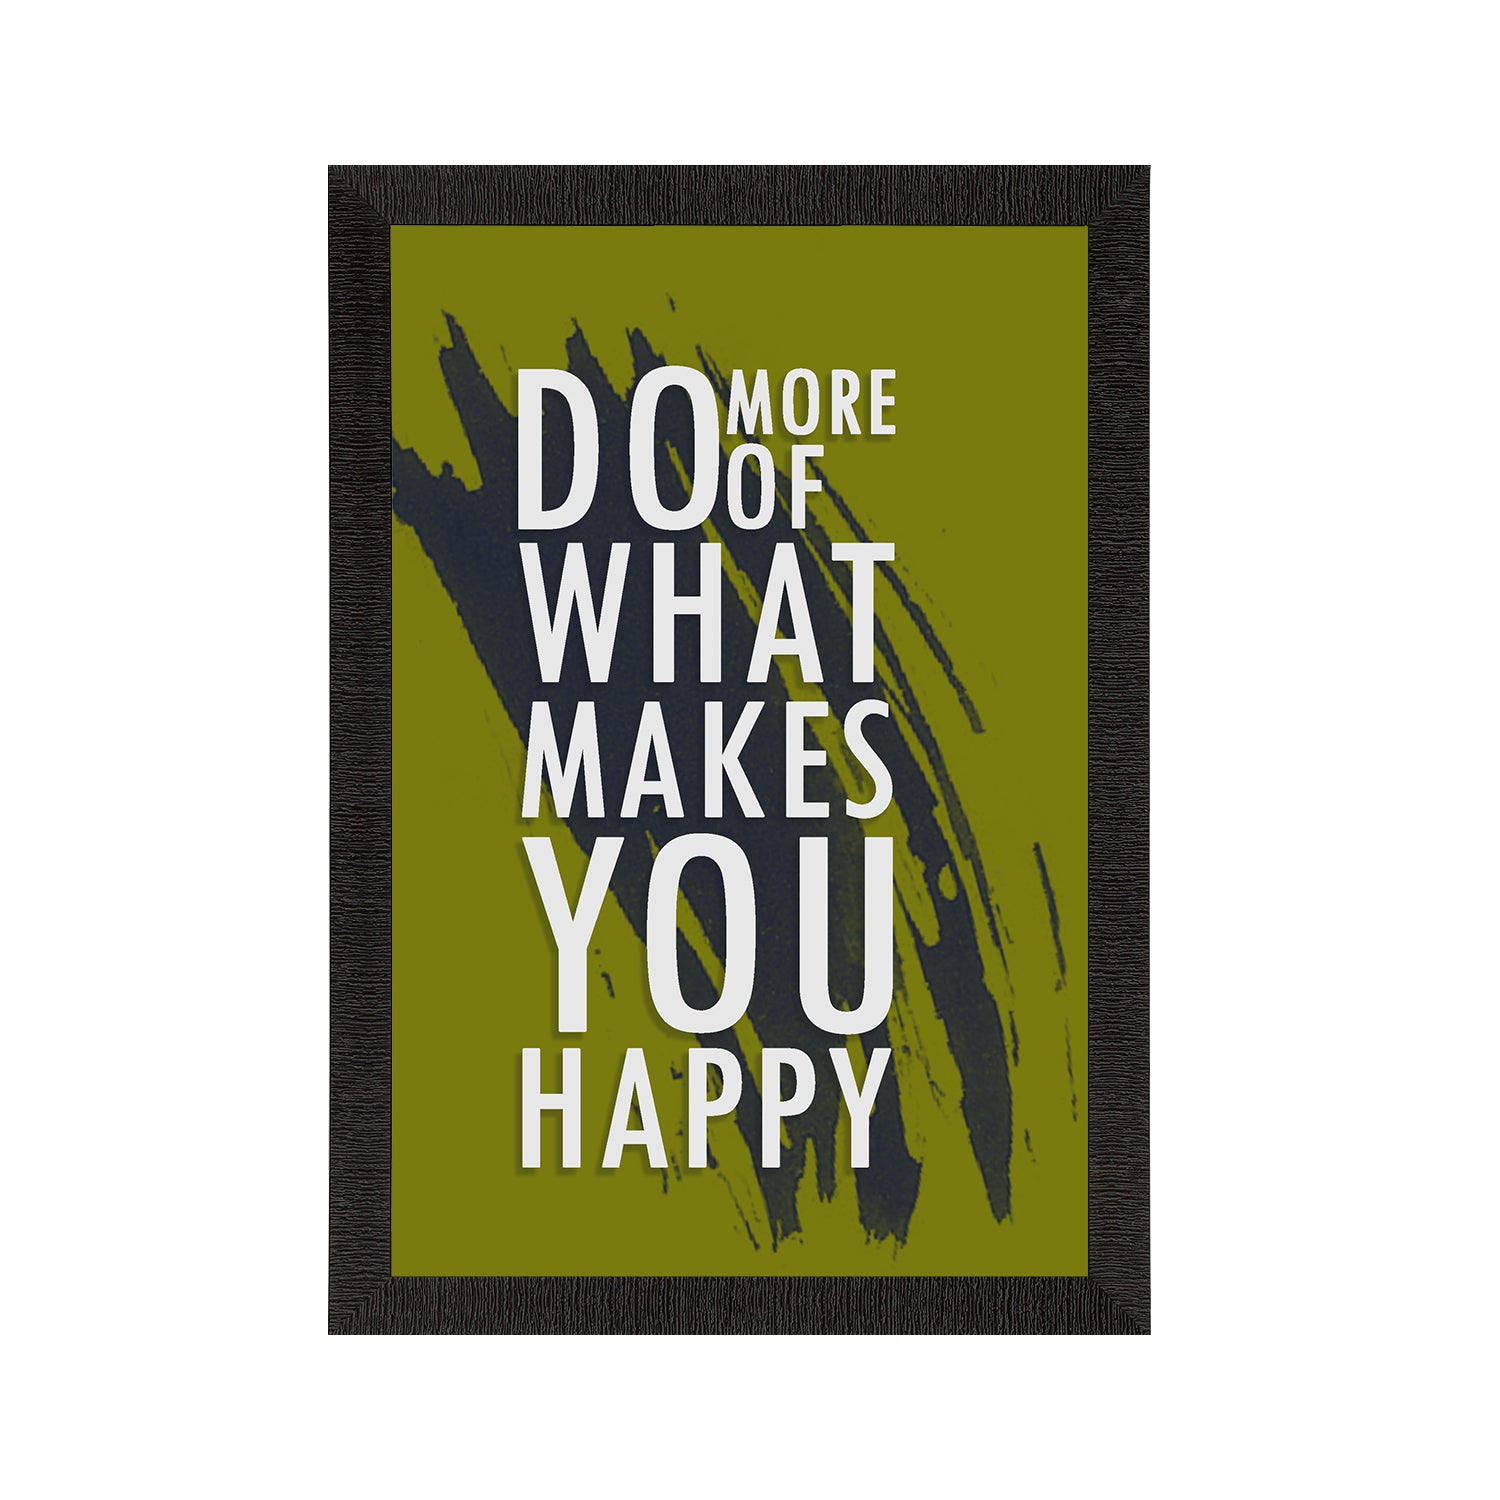 "Do more of what makes you Happy" Motivational Quote Satin Matt Texture UV Art Painting